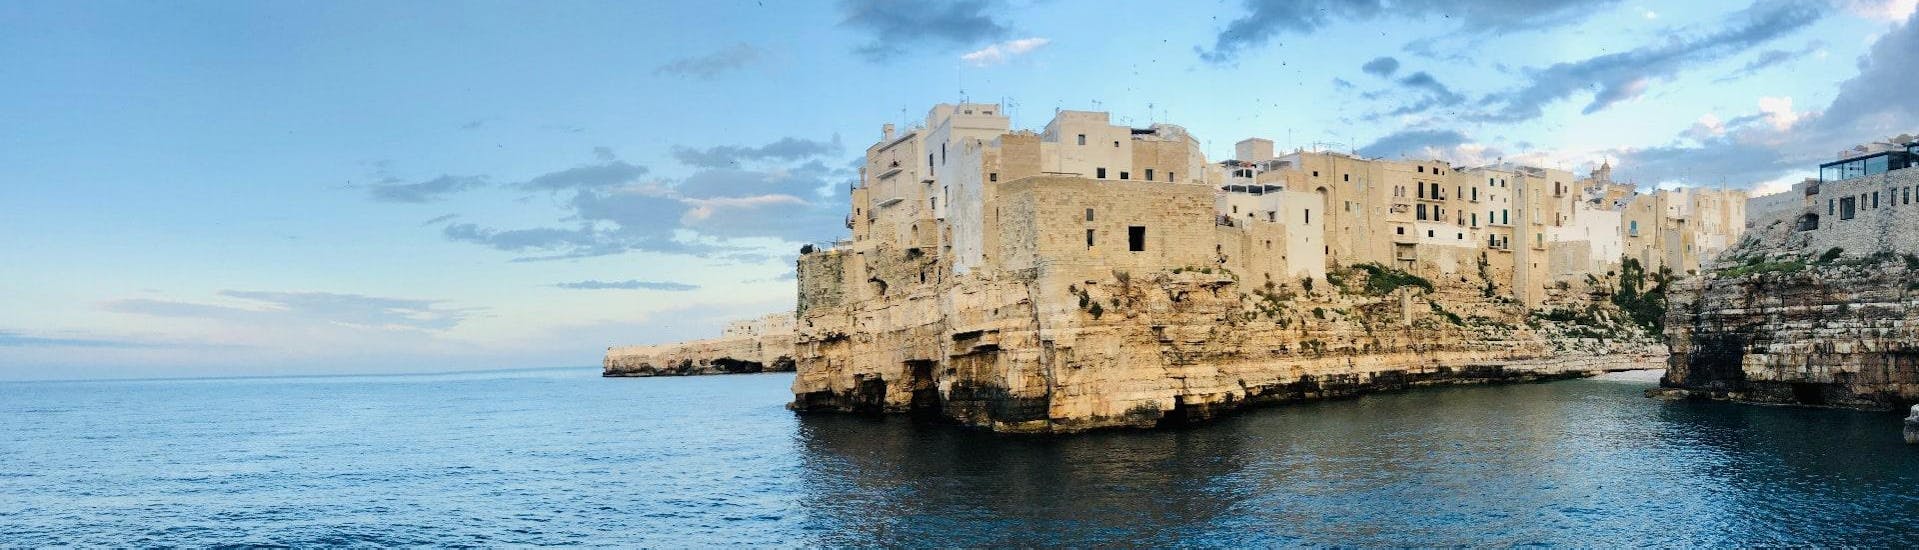 Boat Trip to the Polignano a Mare Caves with Snorkeling.